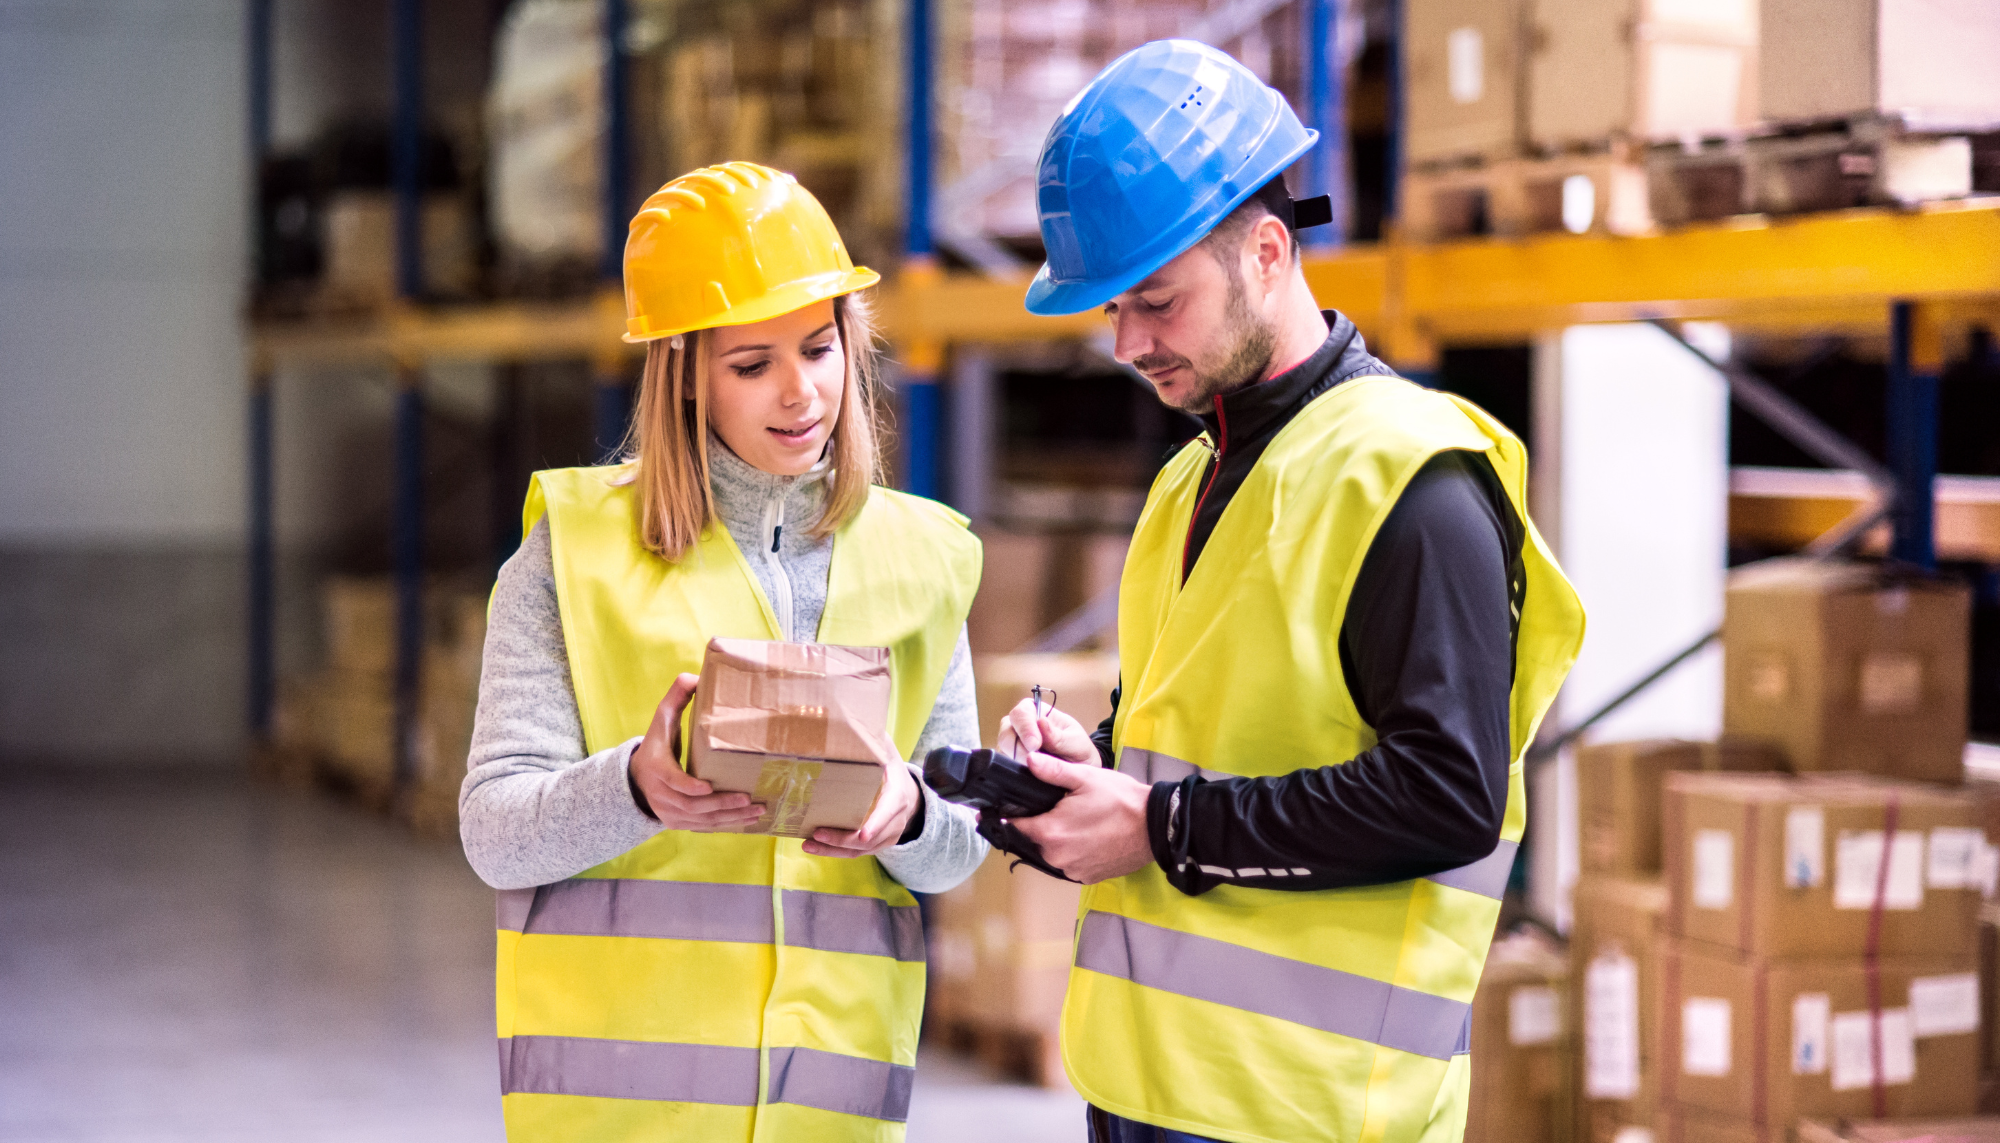 man and women in high visbility clothing and hard hats in a warehouse or manufacturing factory looking at a small tablet